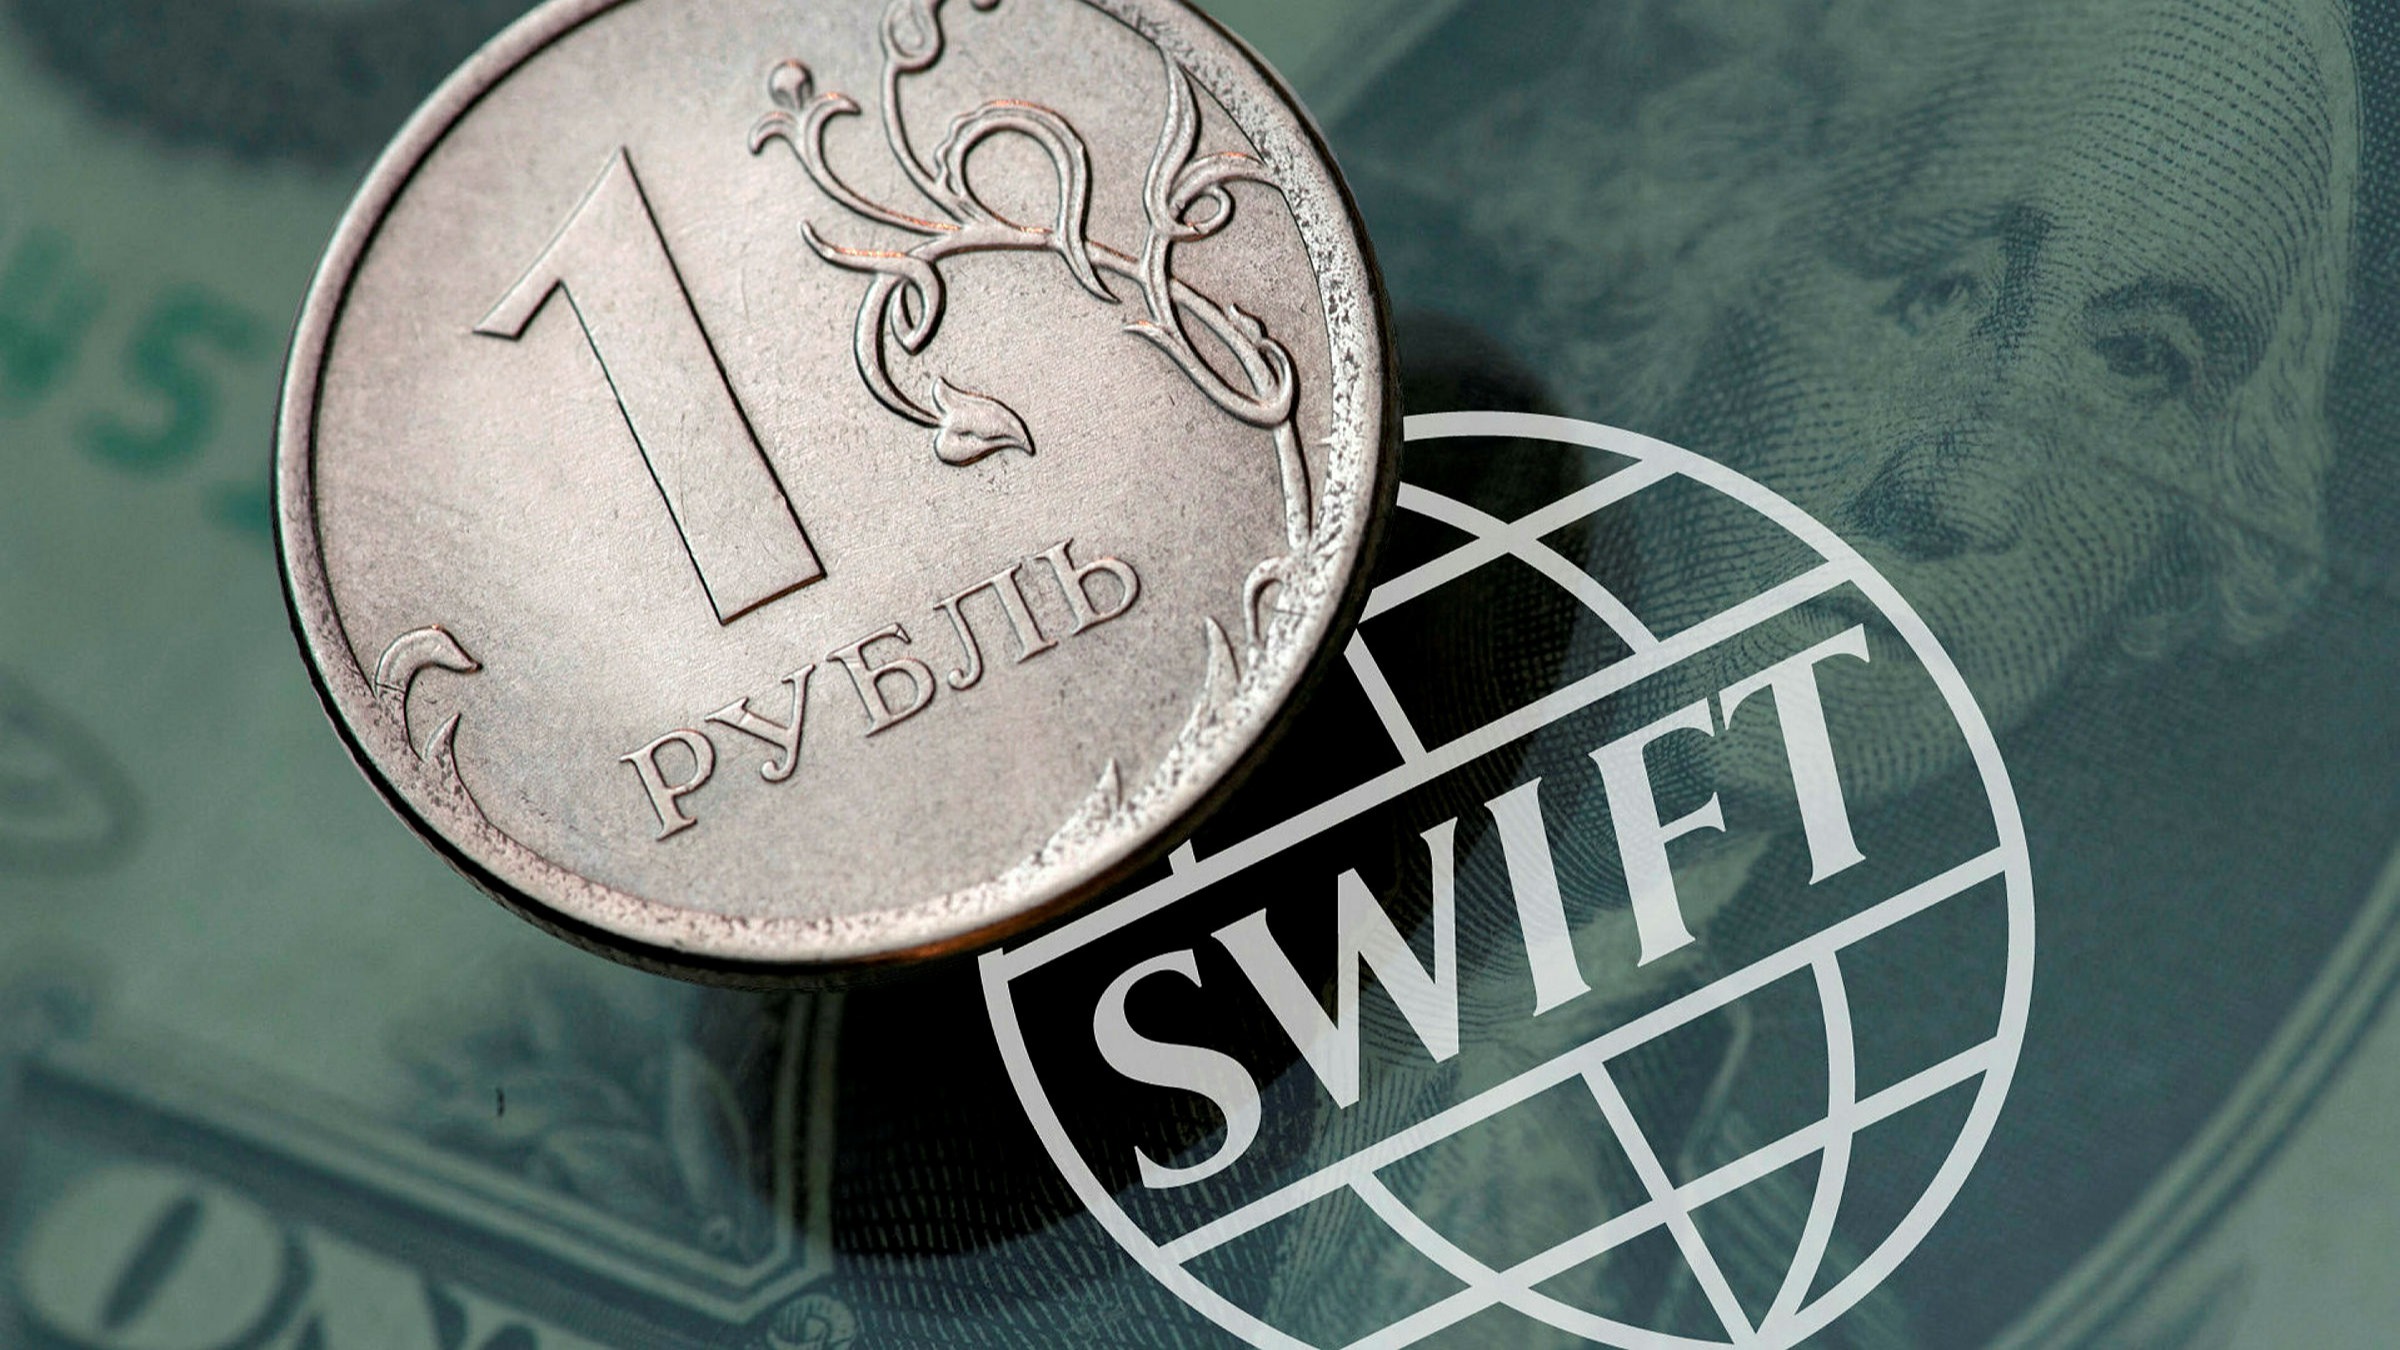 The impact of throwing Russia out of Swift | Financial Times